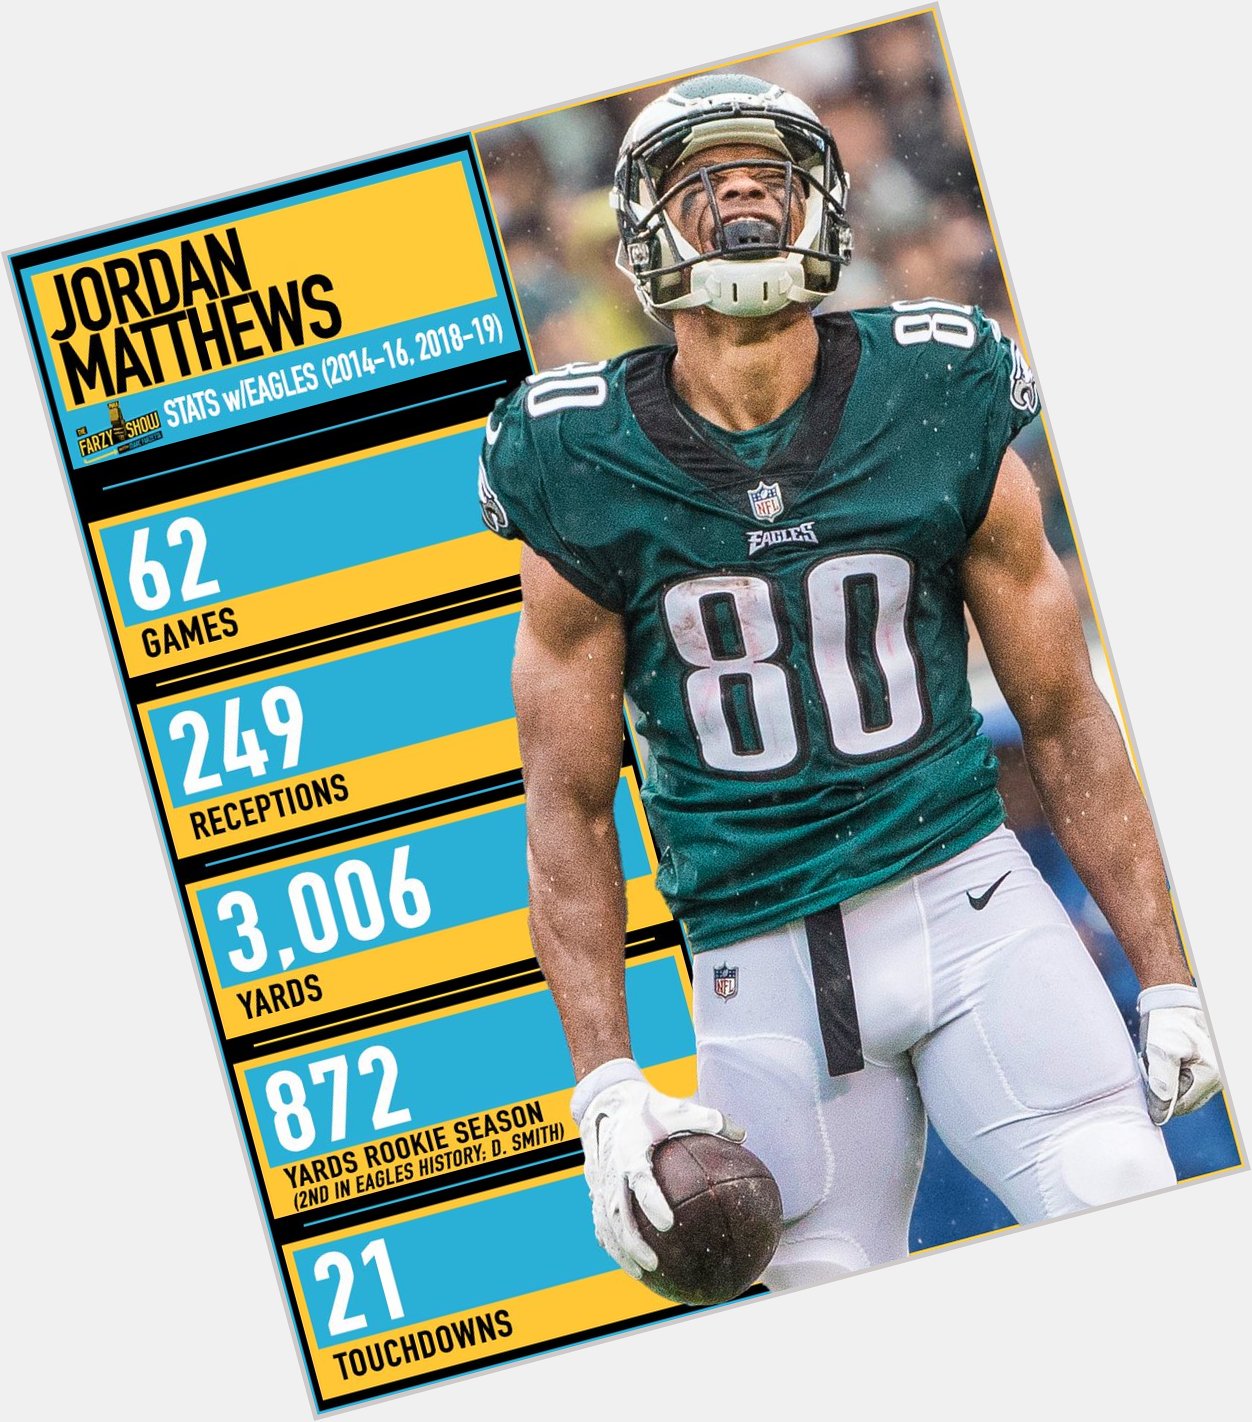 Happy birthday to Jordan Matthews, one of the best wideouts in the last decade!  